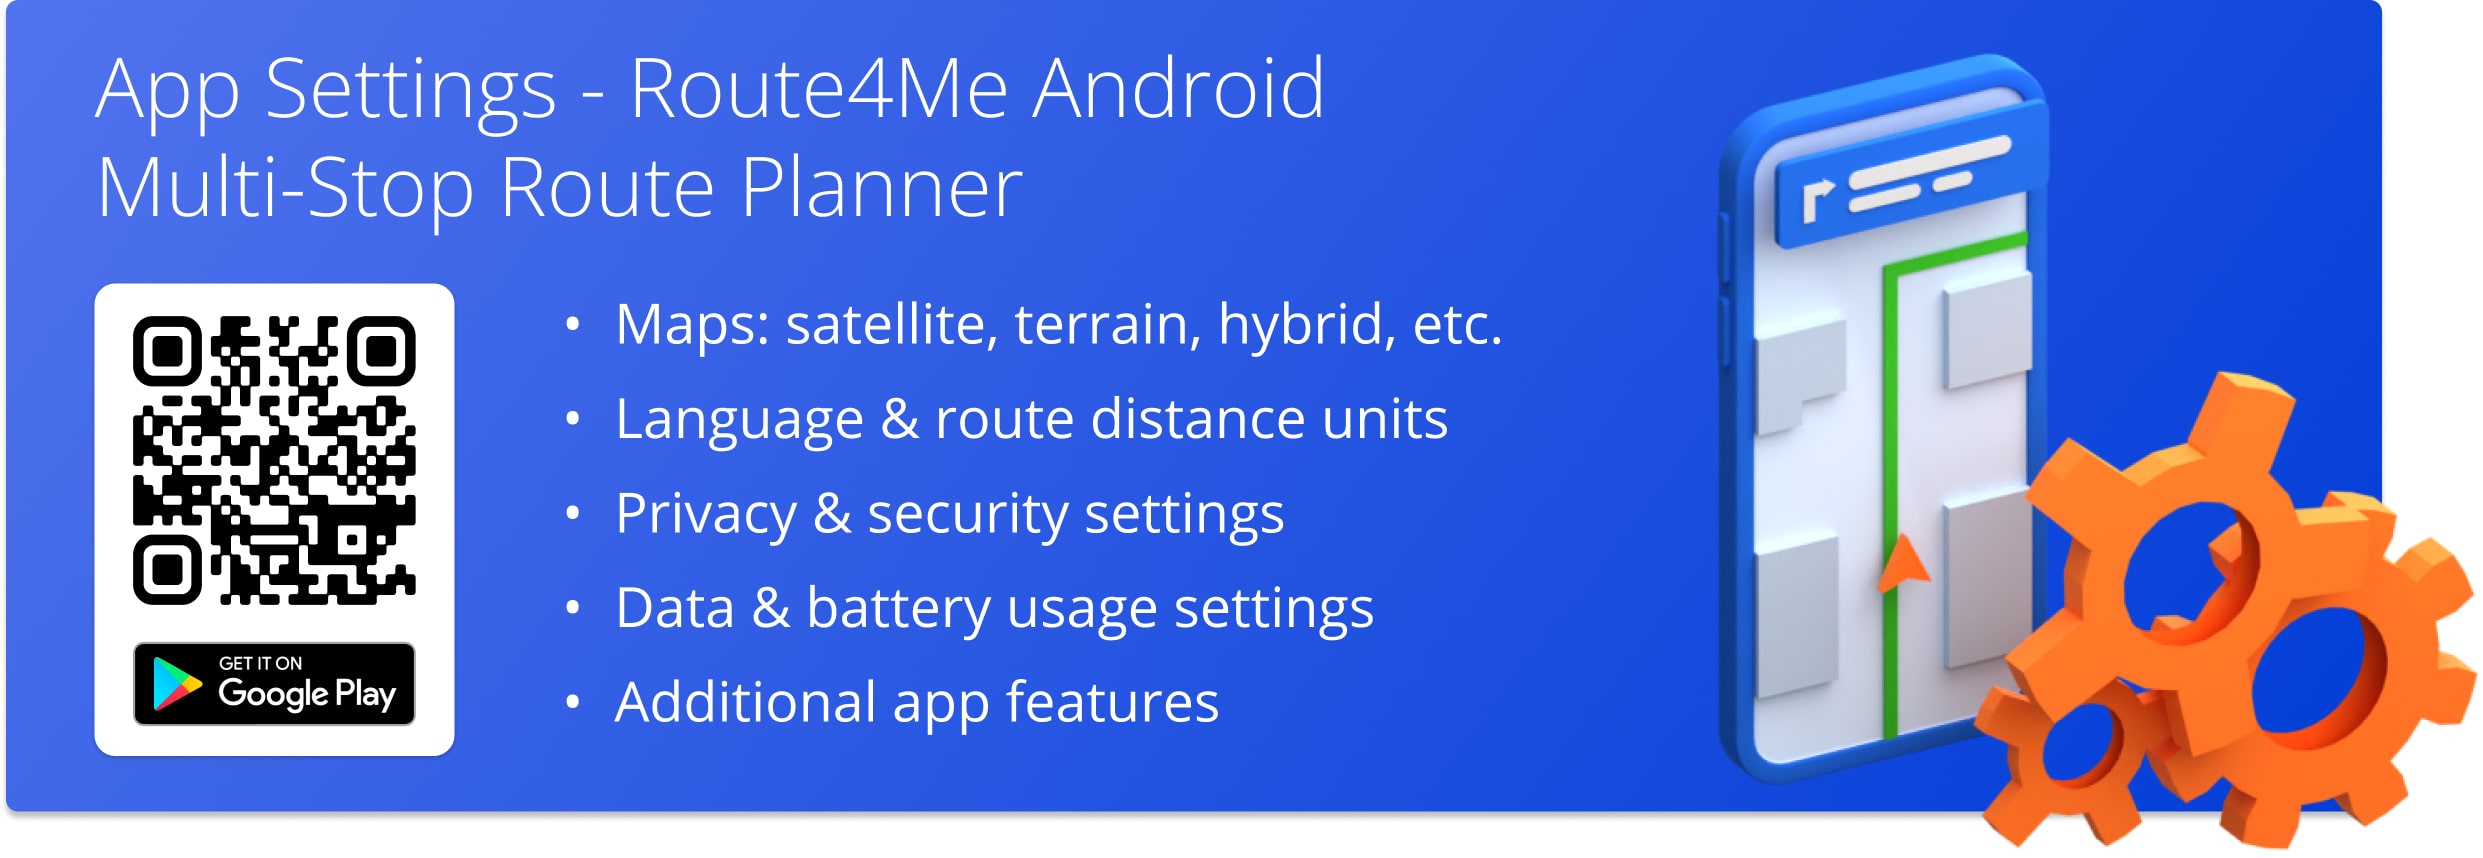 Route4Me Android Route Planner app settings for route maps, language and distance units, security and privacy, data usage, and more.